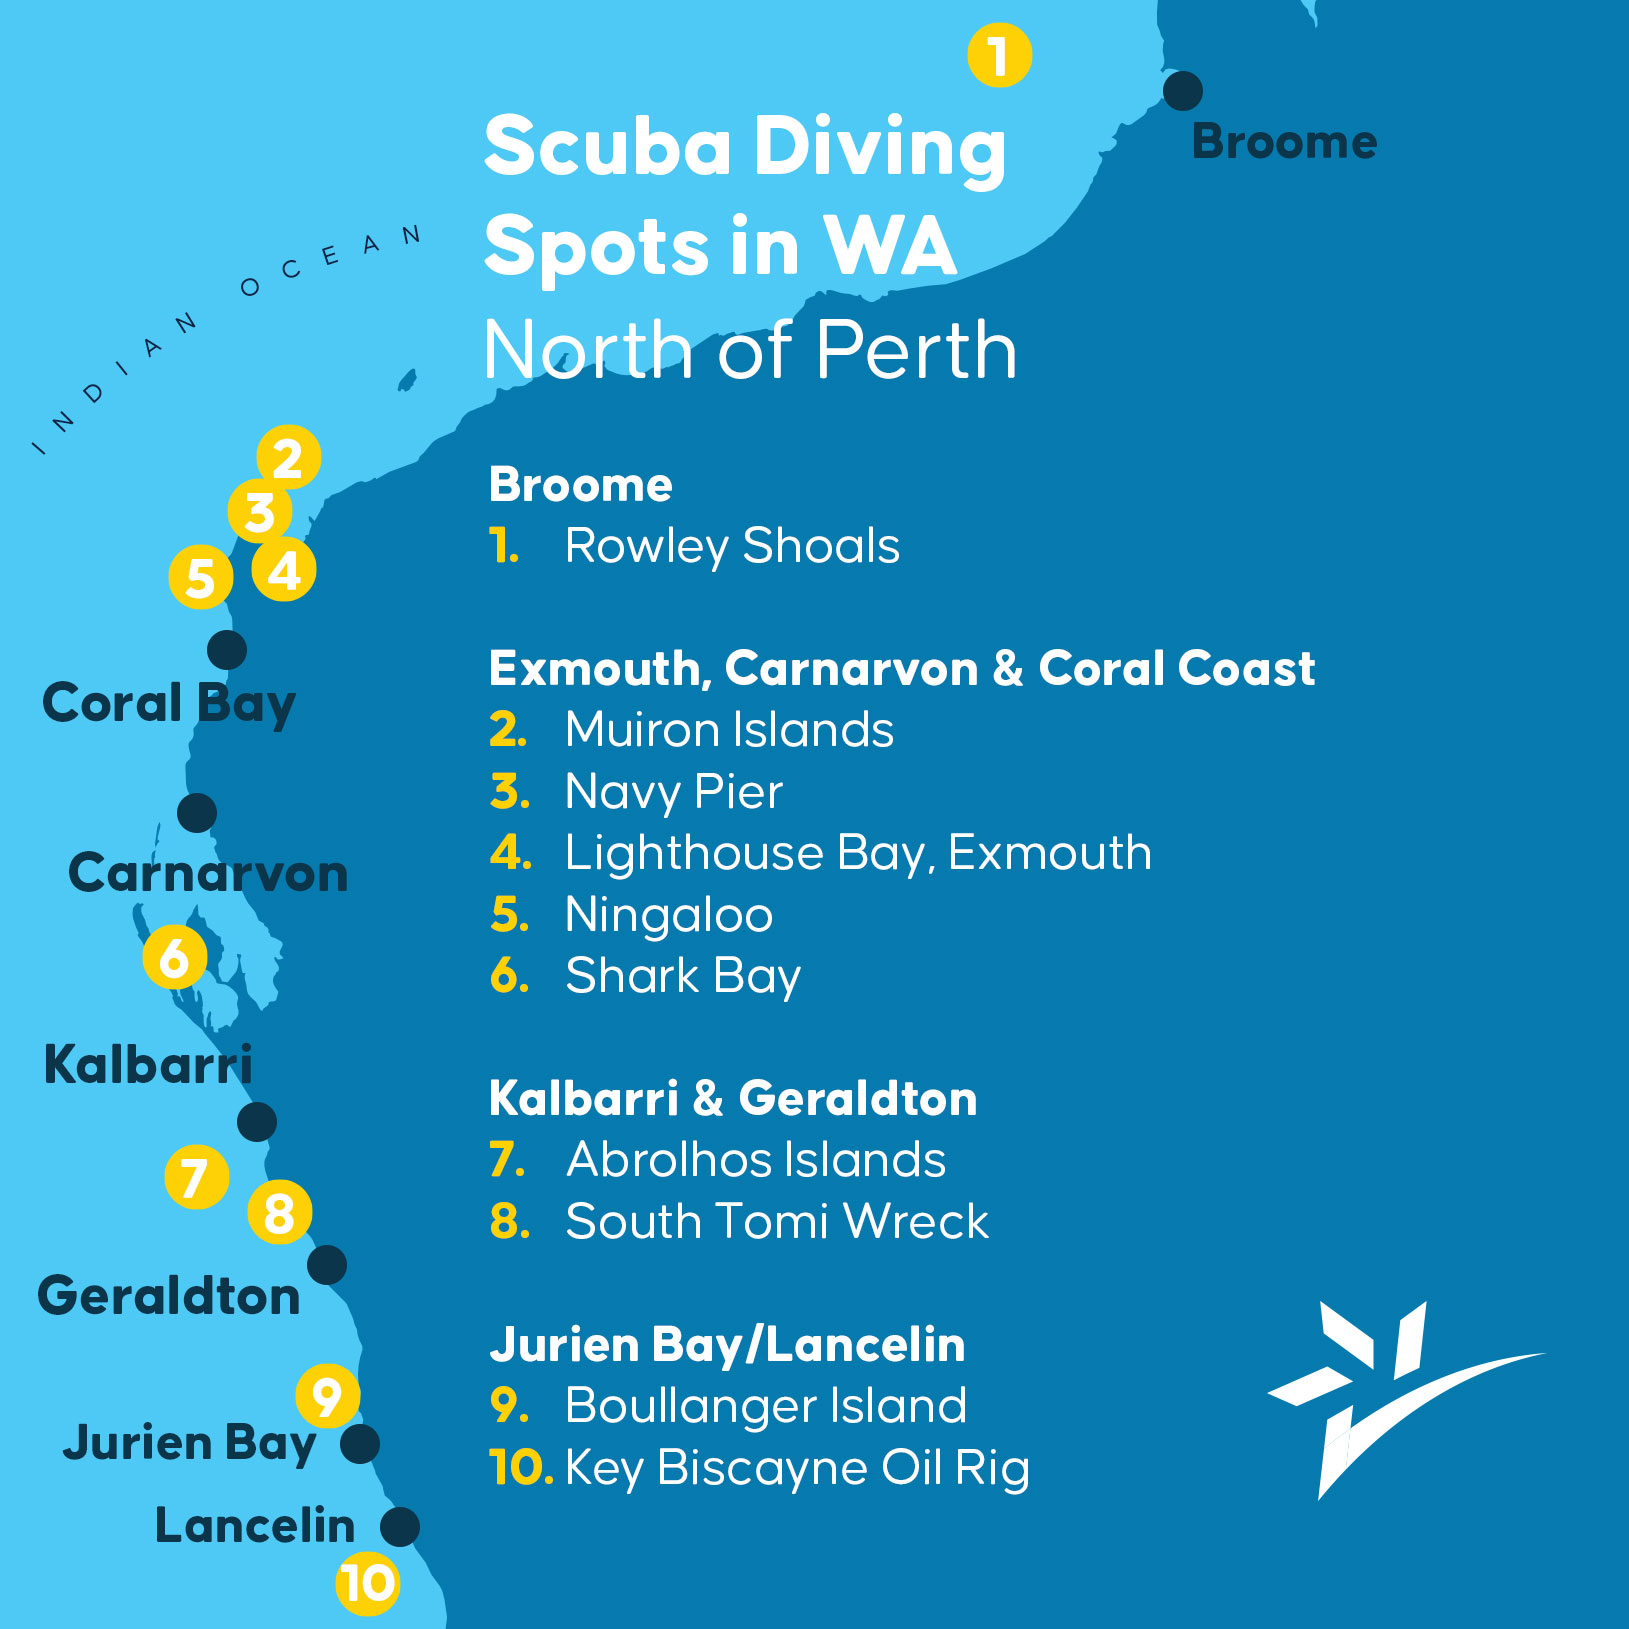 The best scuba diving spots in wa north of Perth.